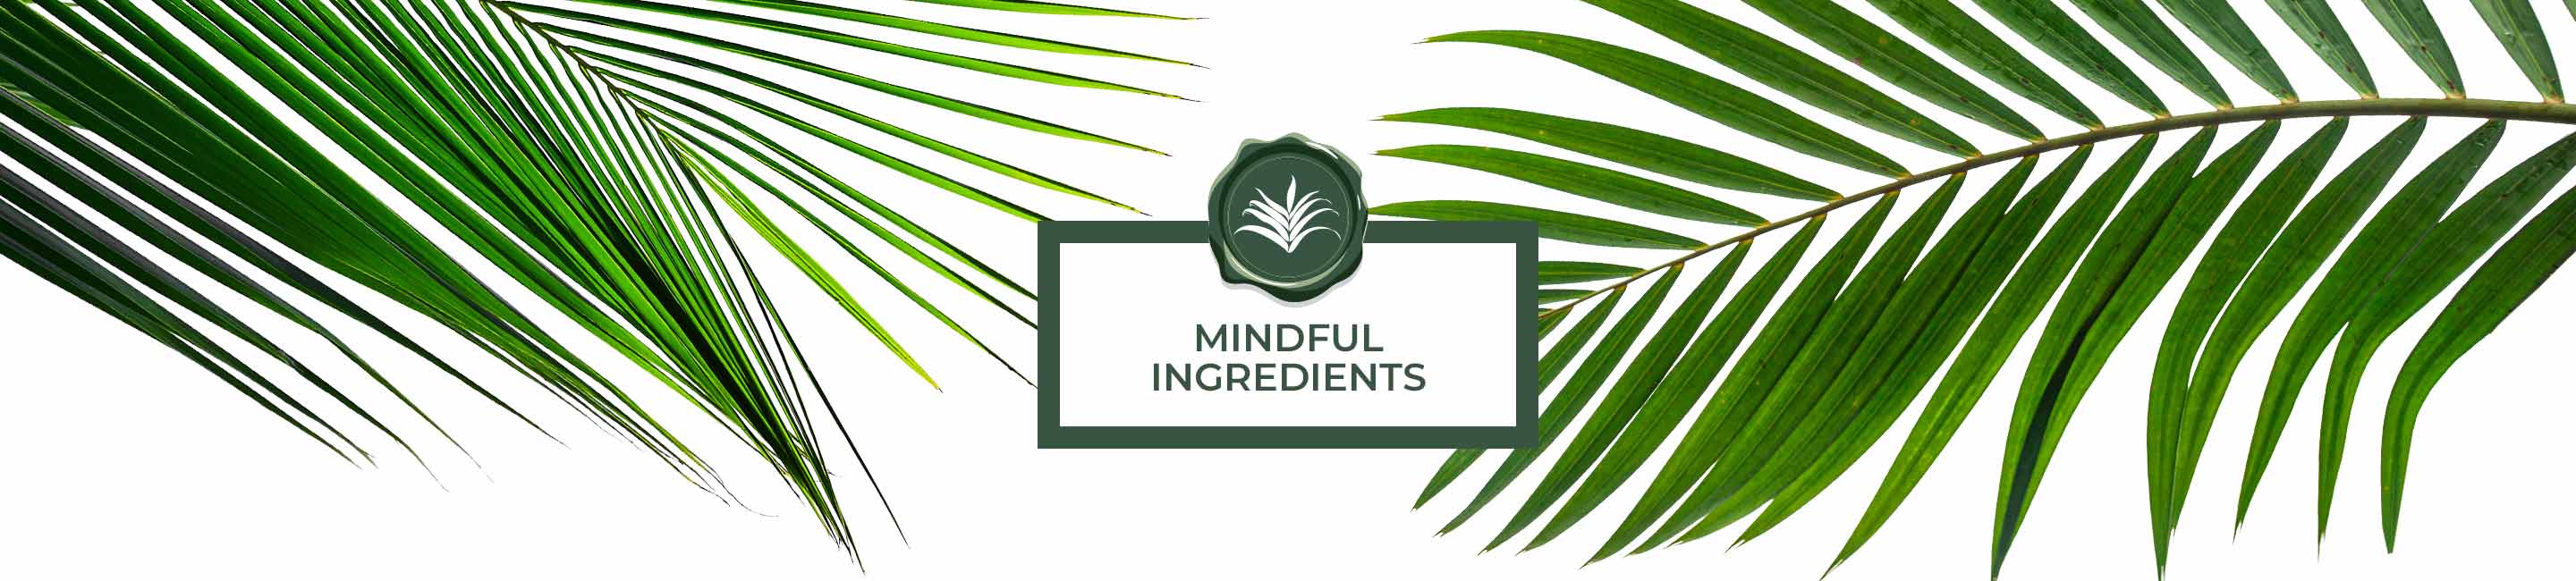 Mindful Ingredients Conscious Beauty Seal with a palm background